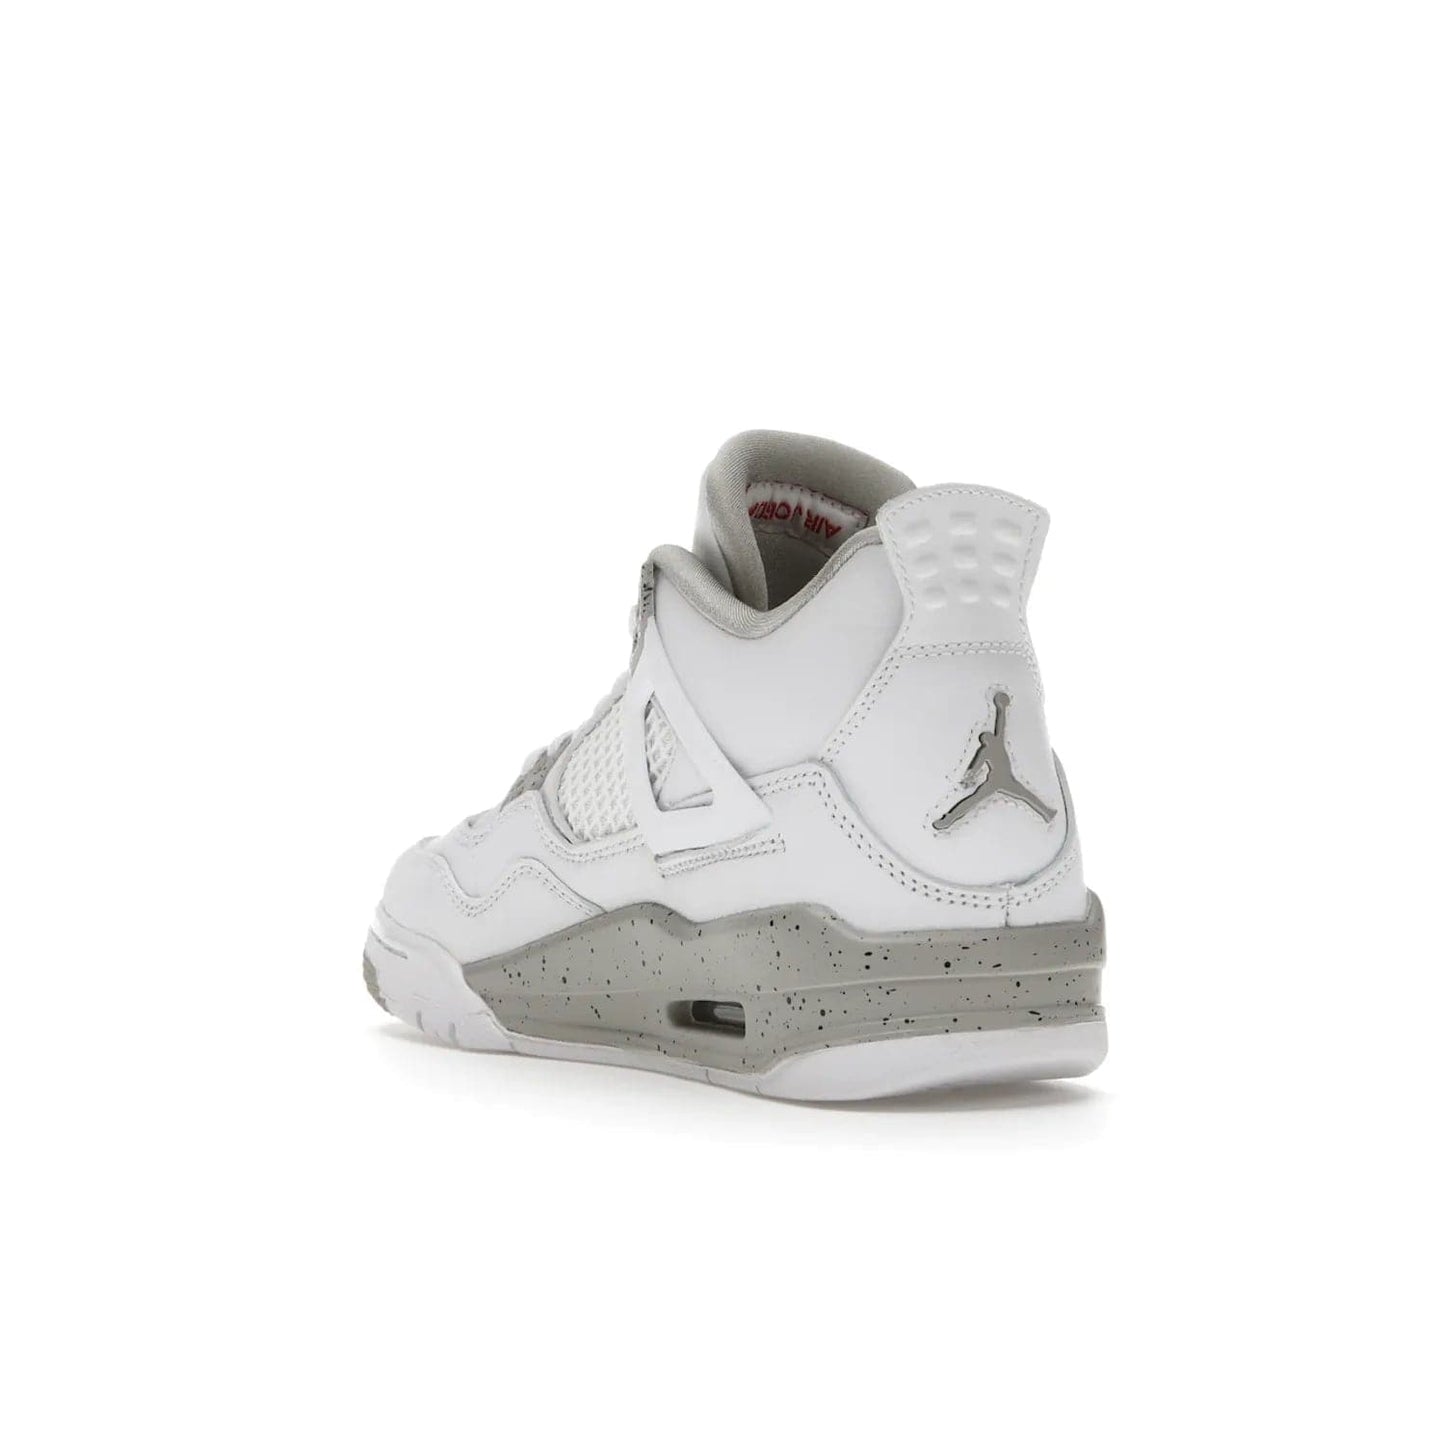 Jordan 4 Retro White Oreo (2021) (GS) - Image 25 - Only at www.BallersClubKickz.com - White Oreo Air Jordan 4 Retro 2021 GS - Iconic sneaker silhouette with white canvas upper, Tech Grey detailing, and Fire Red accents. Available July 2021.